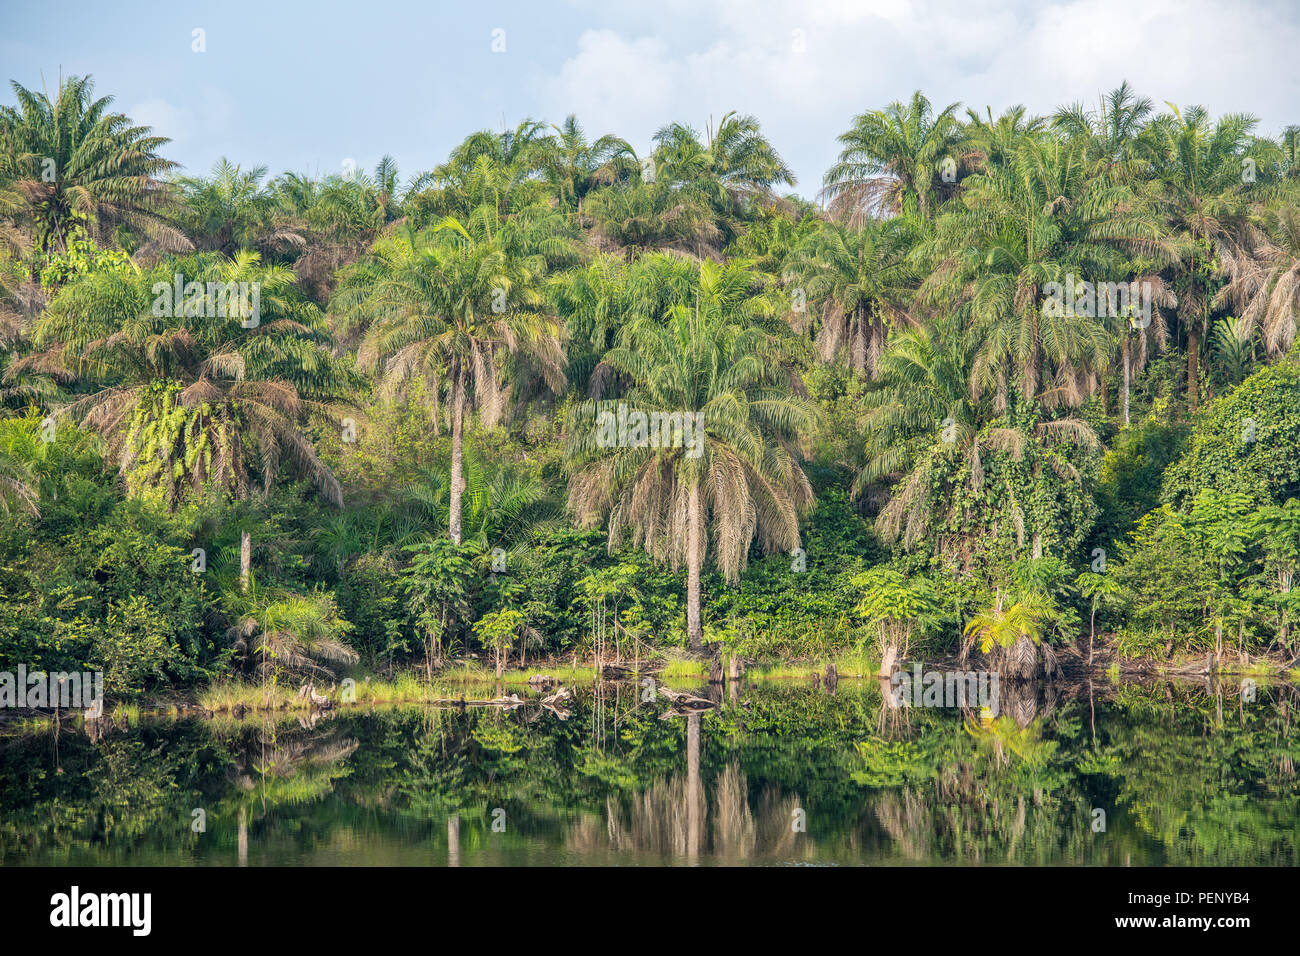 Full frame image of palm trees reflecting on water in Ganta Liberia. Stock Photo